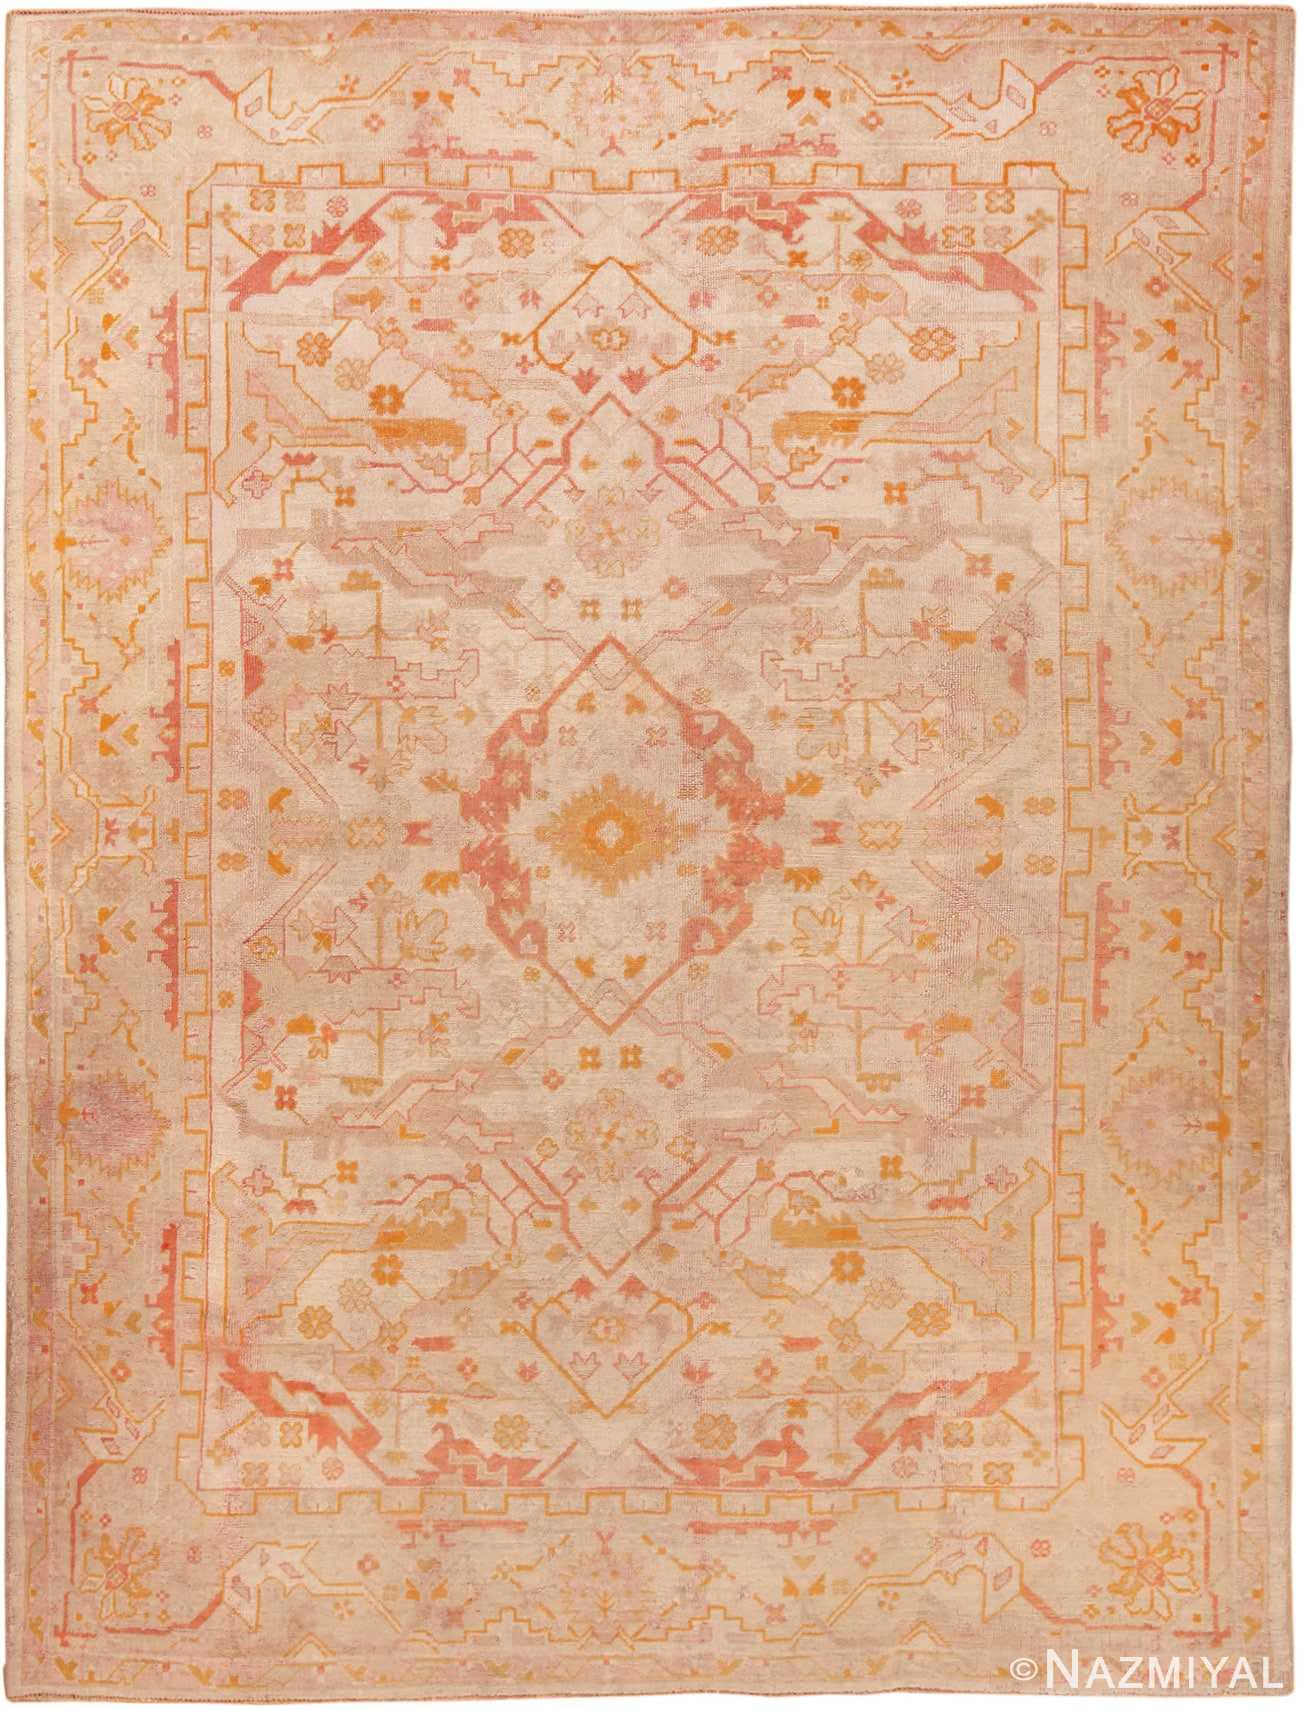 Antique Turkish Oushak Rug 70220 from Nazmiyal Antique Rugs in NYC